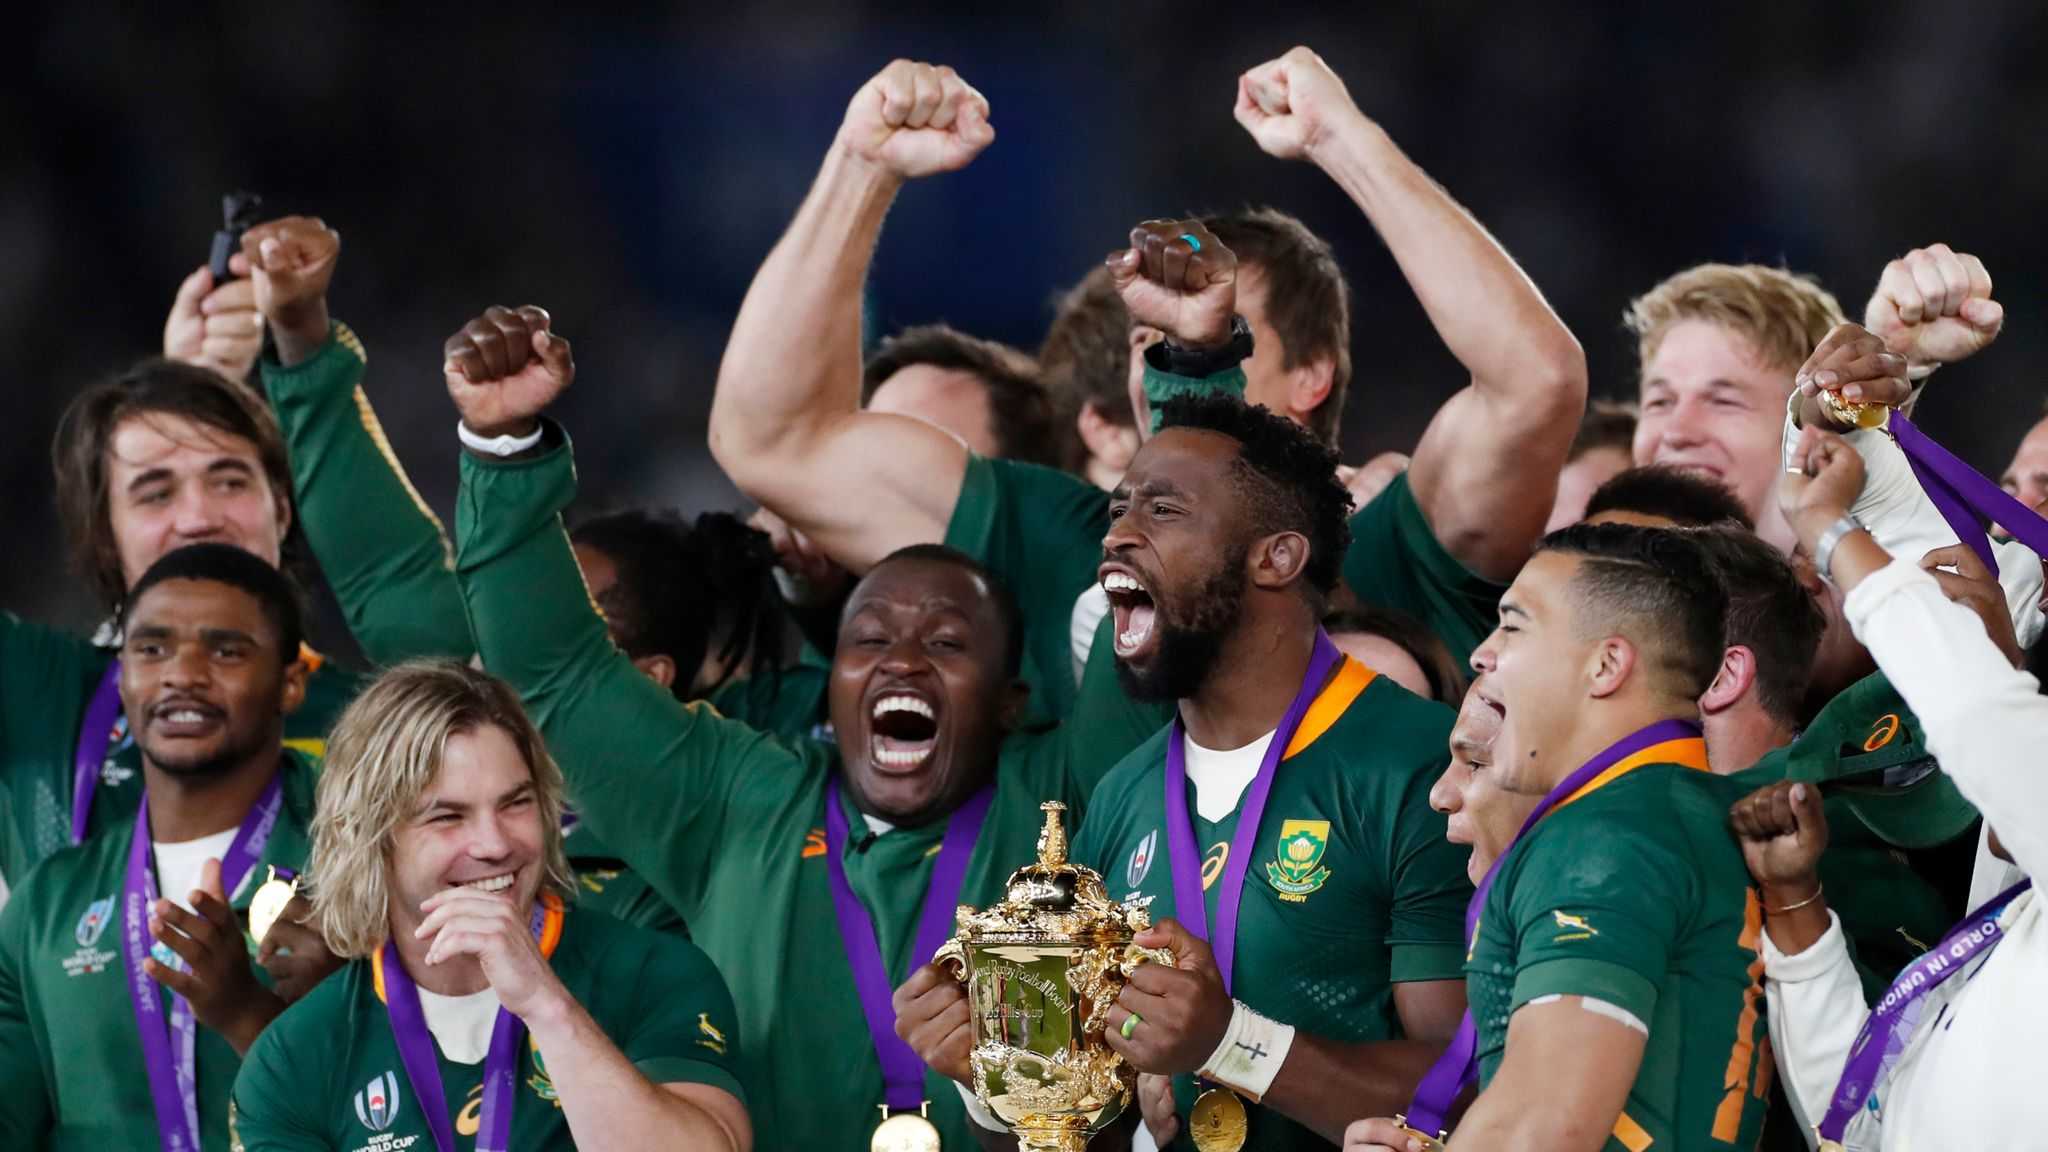 Rugby World Cup final: Heartbreak for England as South Africa win 32-12